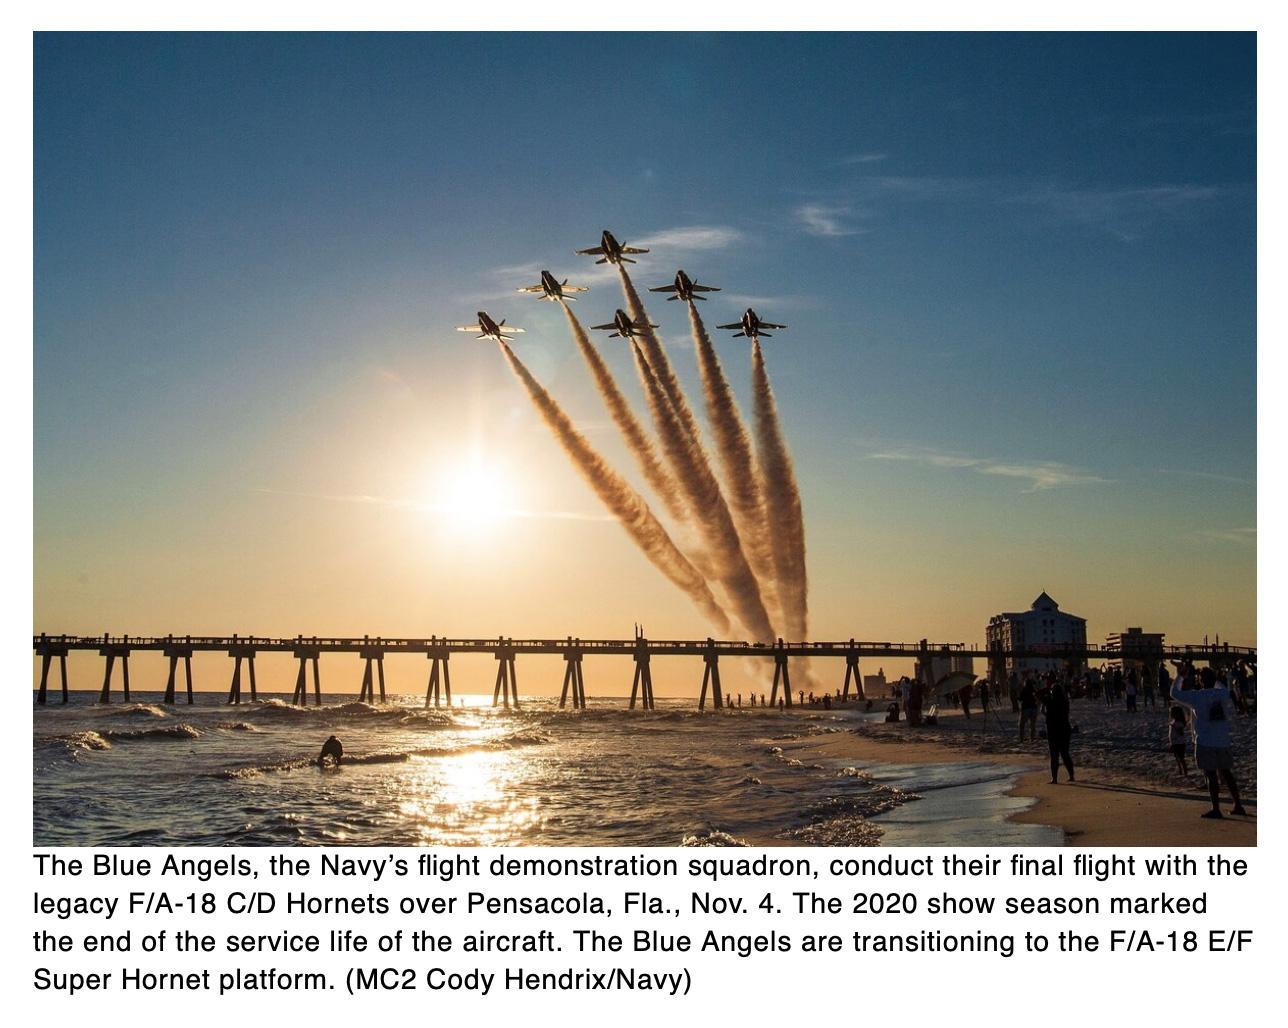  New in 2021: Blue Angels to start flying F/A-18 Super Hornets